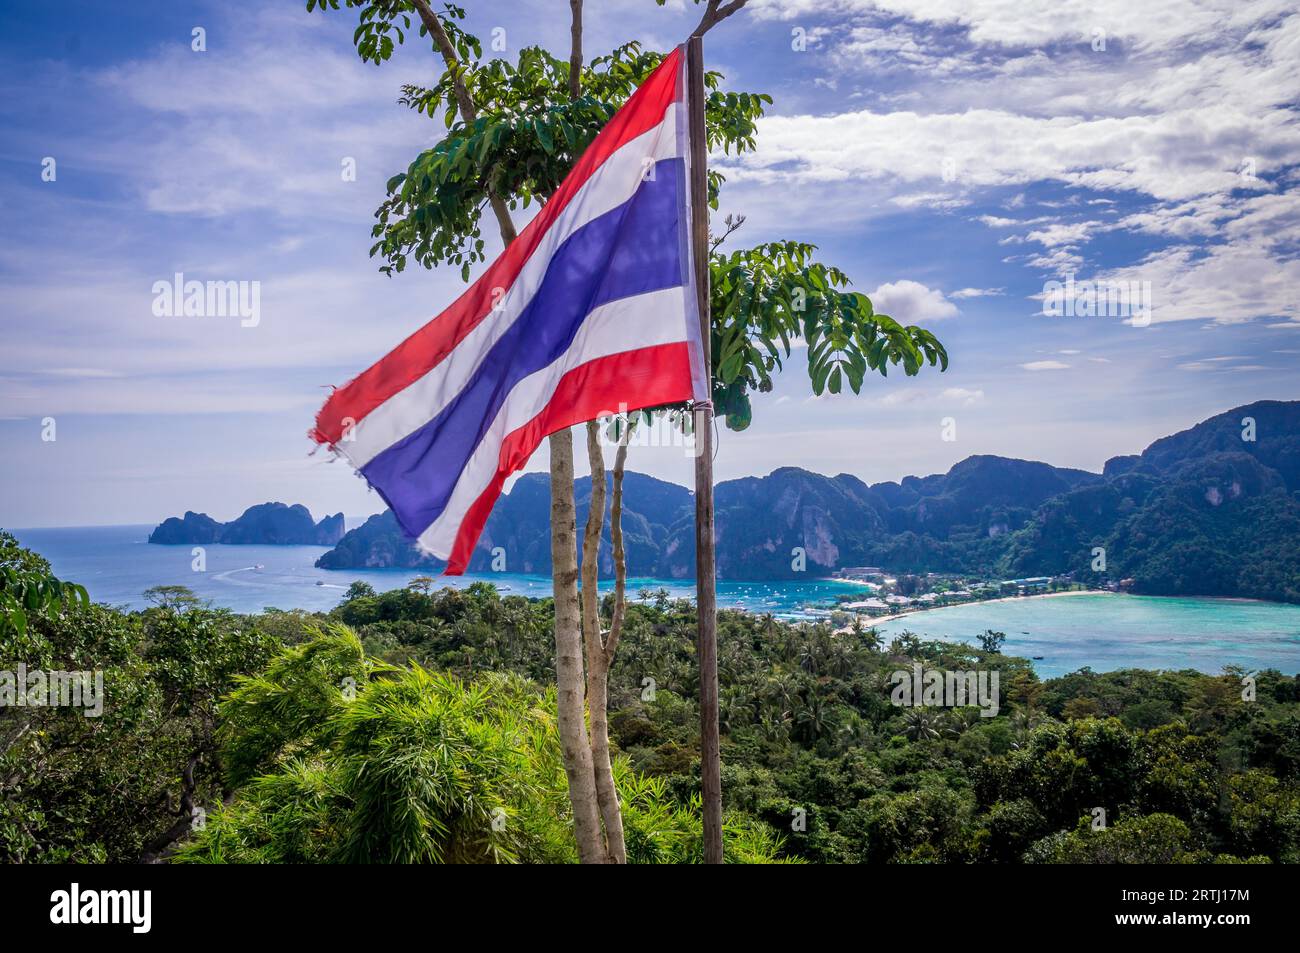 View of beautiful Ko Phi Phi Don island from Viewpoint 3 with waving Thailand flag Stock Photo